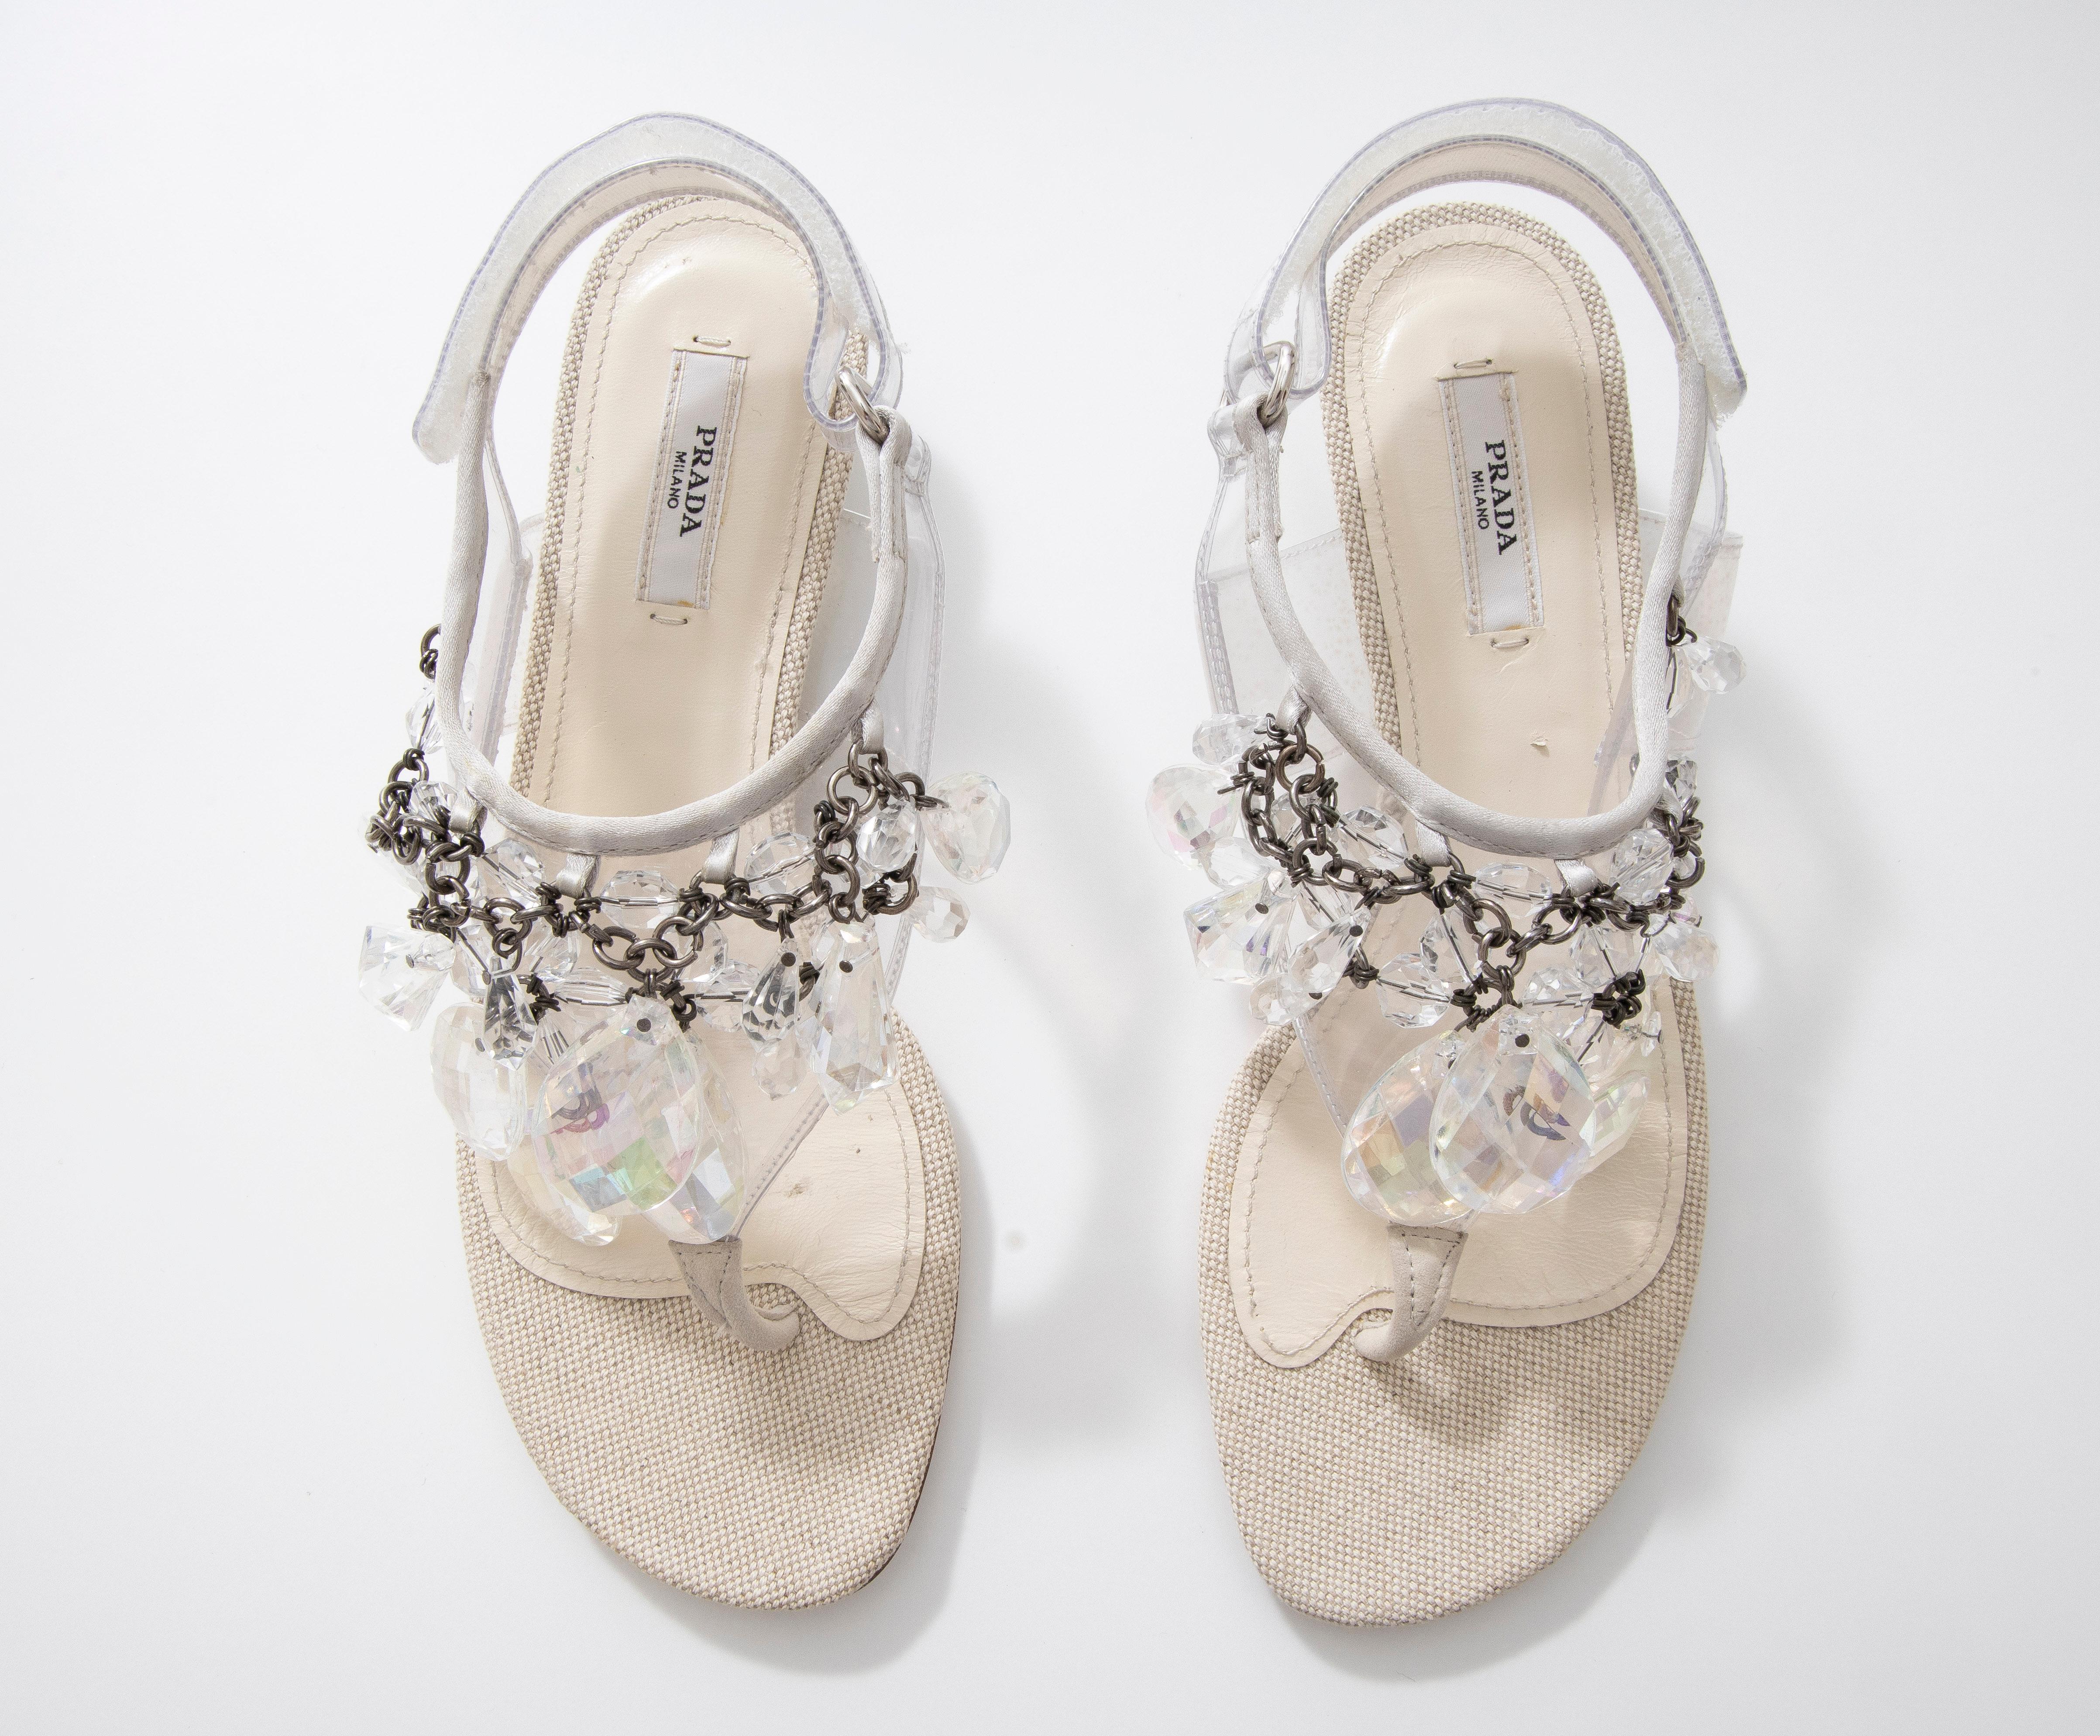 Prada Runway Clear PVC Lucite Faceted Crystal Thong Sandals, Spring 2010 12